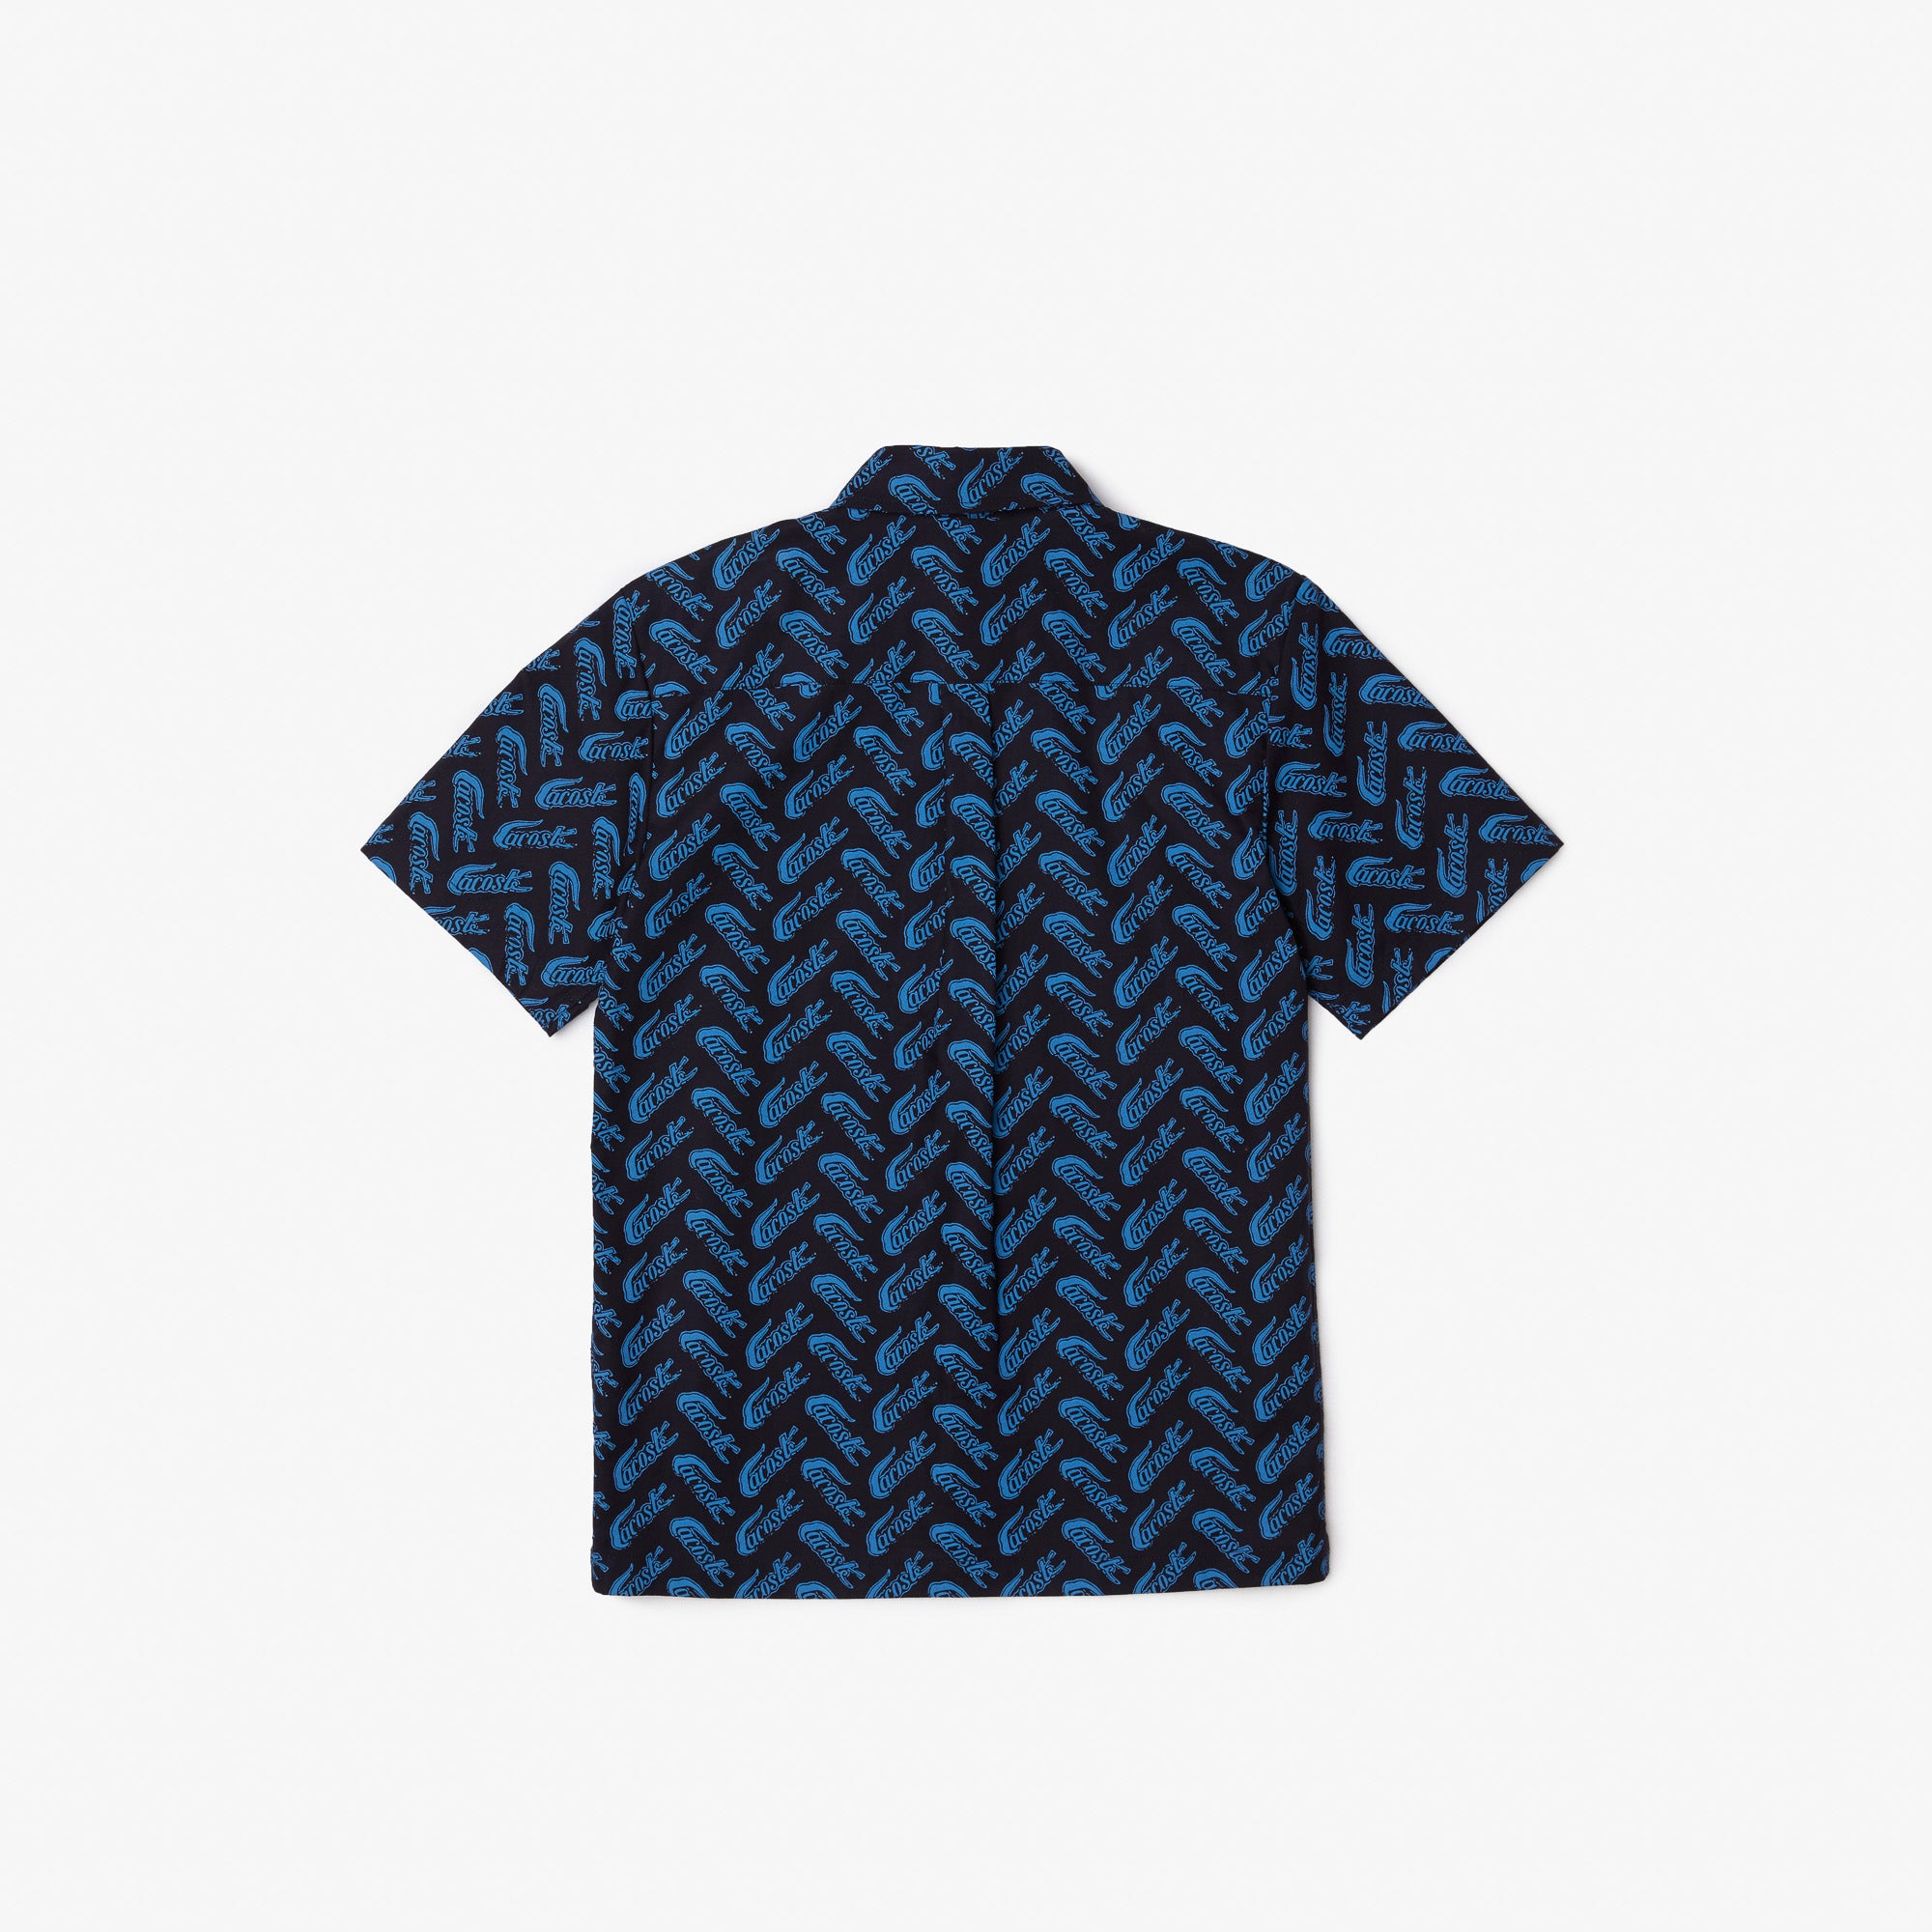 Lacoste Kids' Short Sleeve Cotton Voile Shirt Navy Blue/Ethereal CJ5482 F65